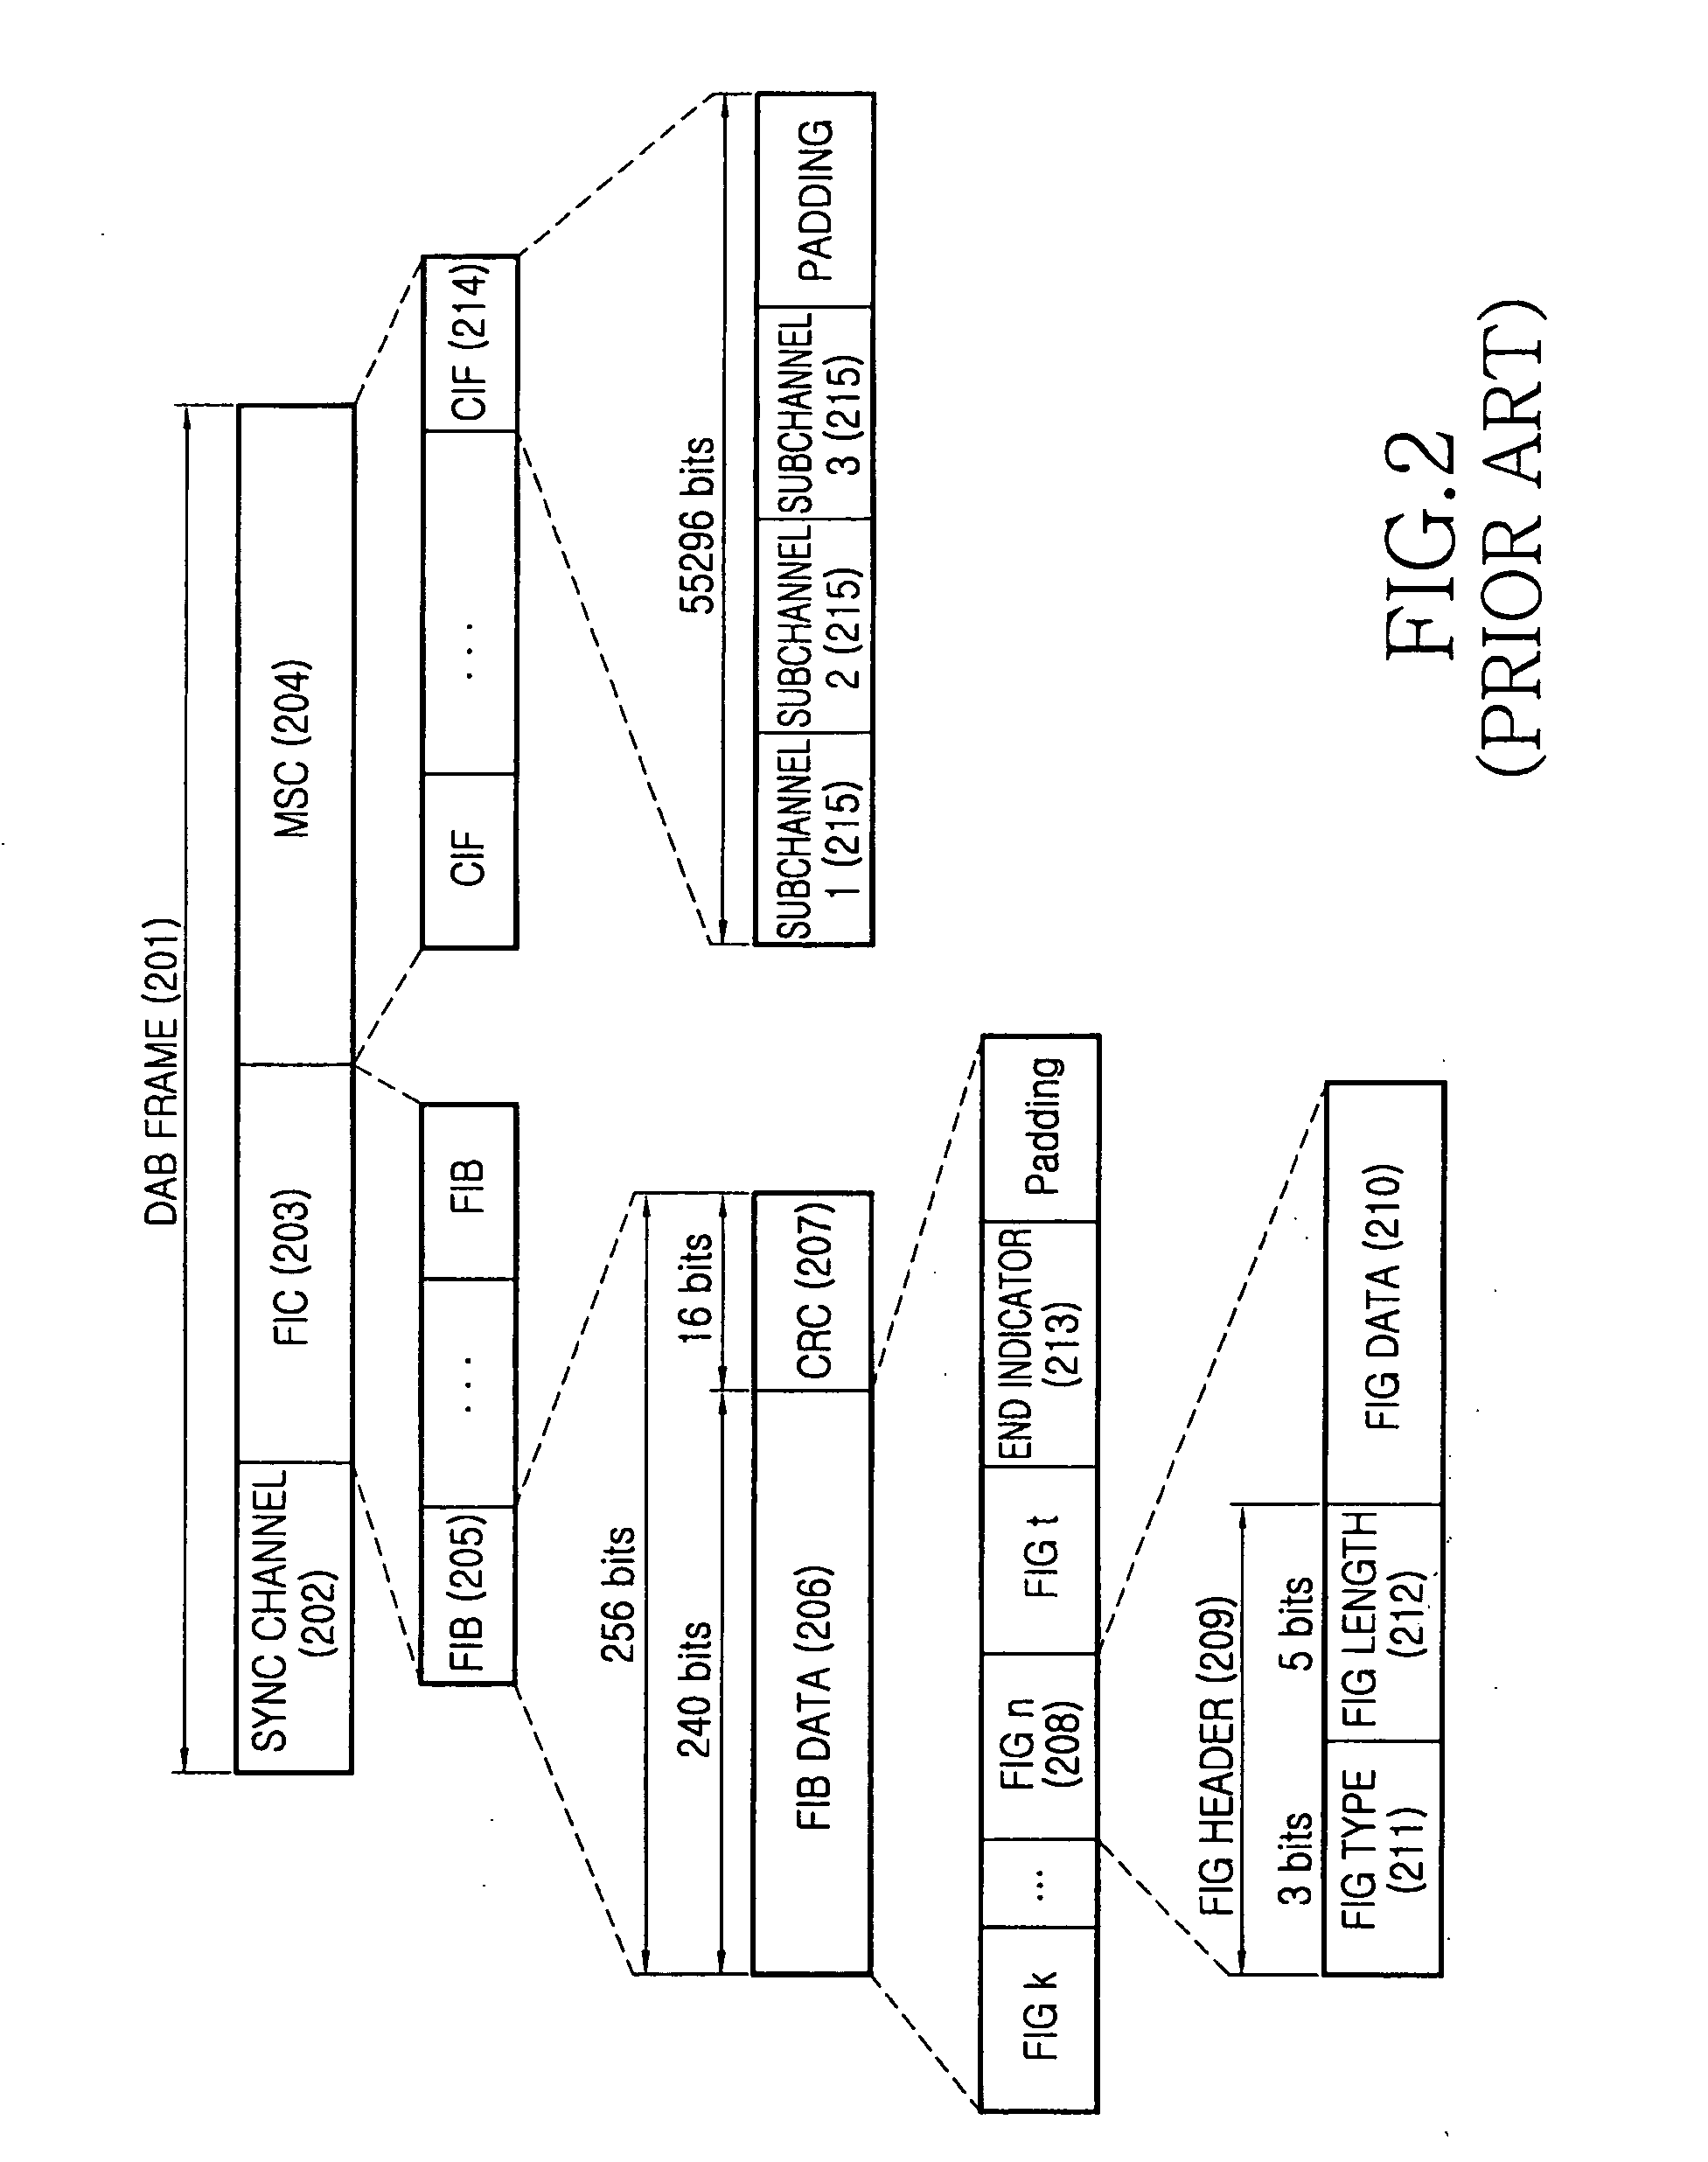 Method and apparatus for supporting a priority data transmission in a transmitter of a digital audio broadcasting system